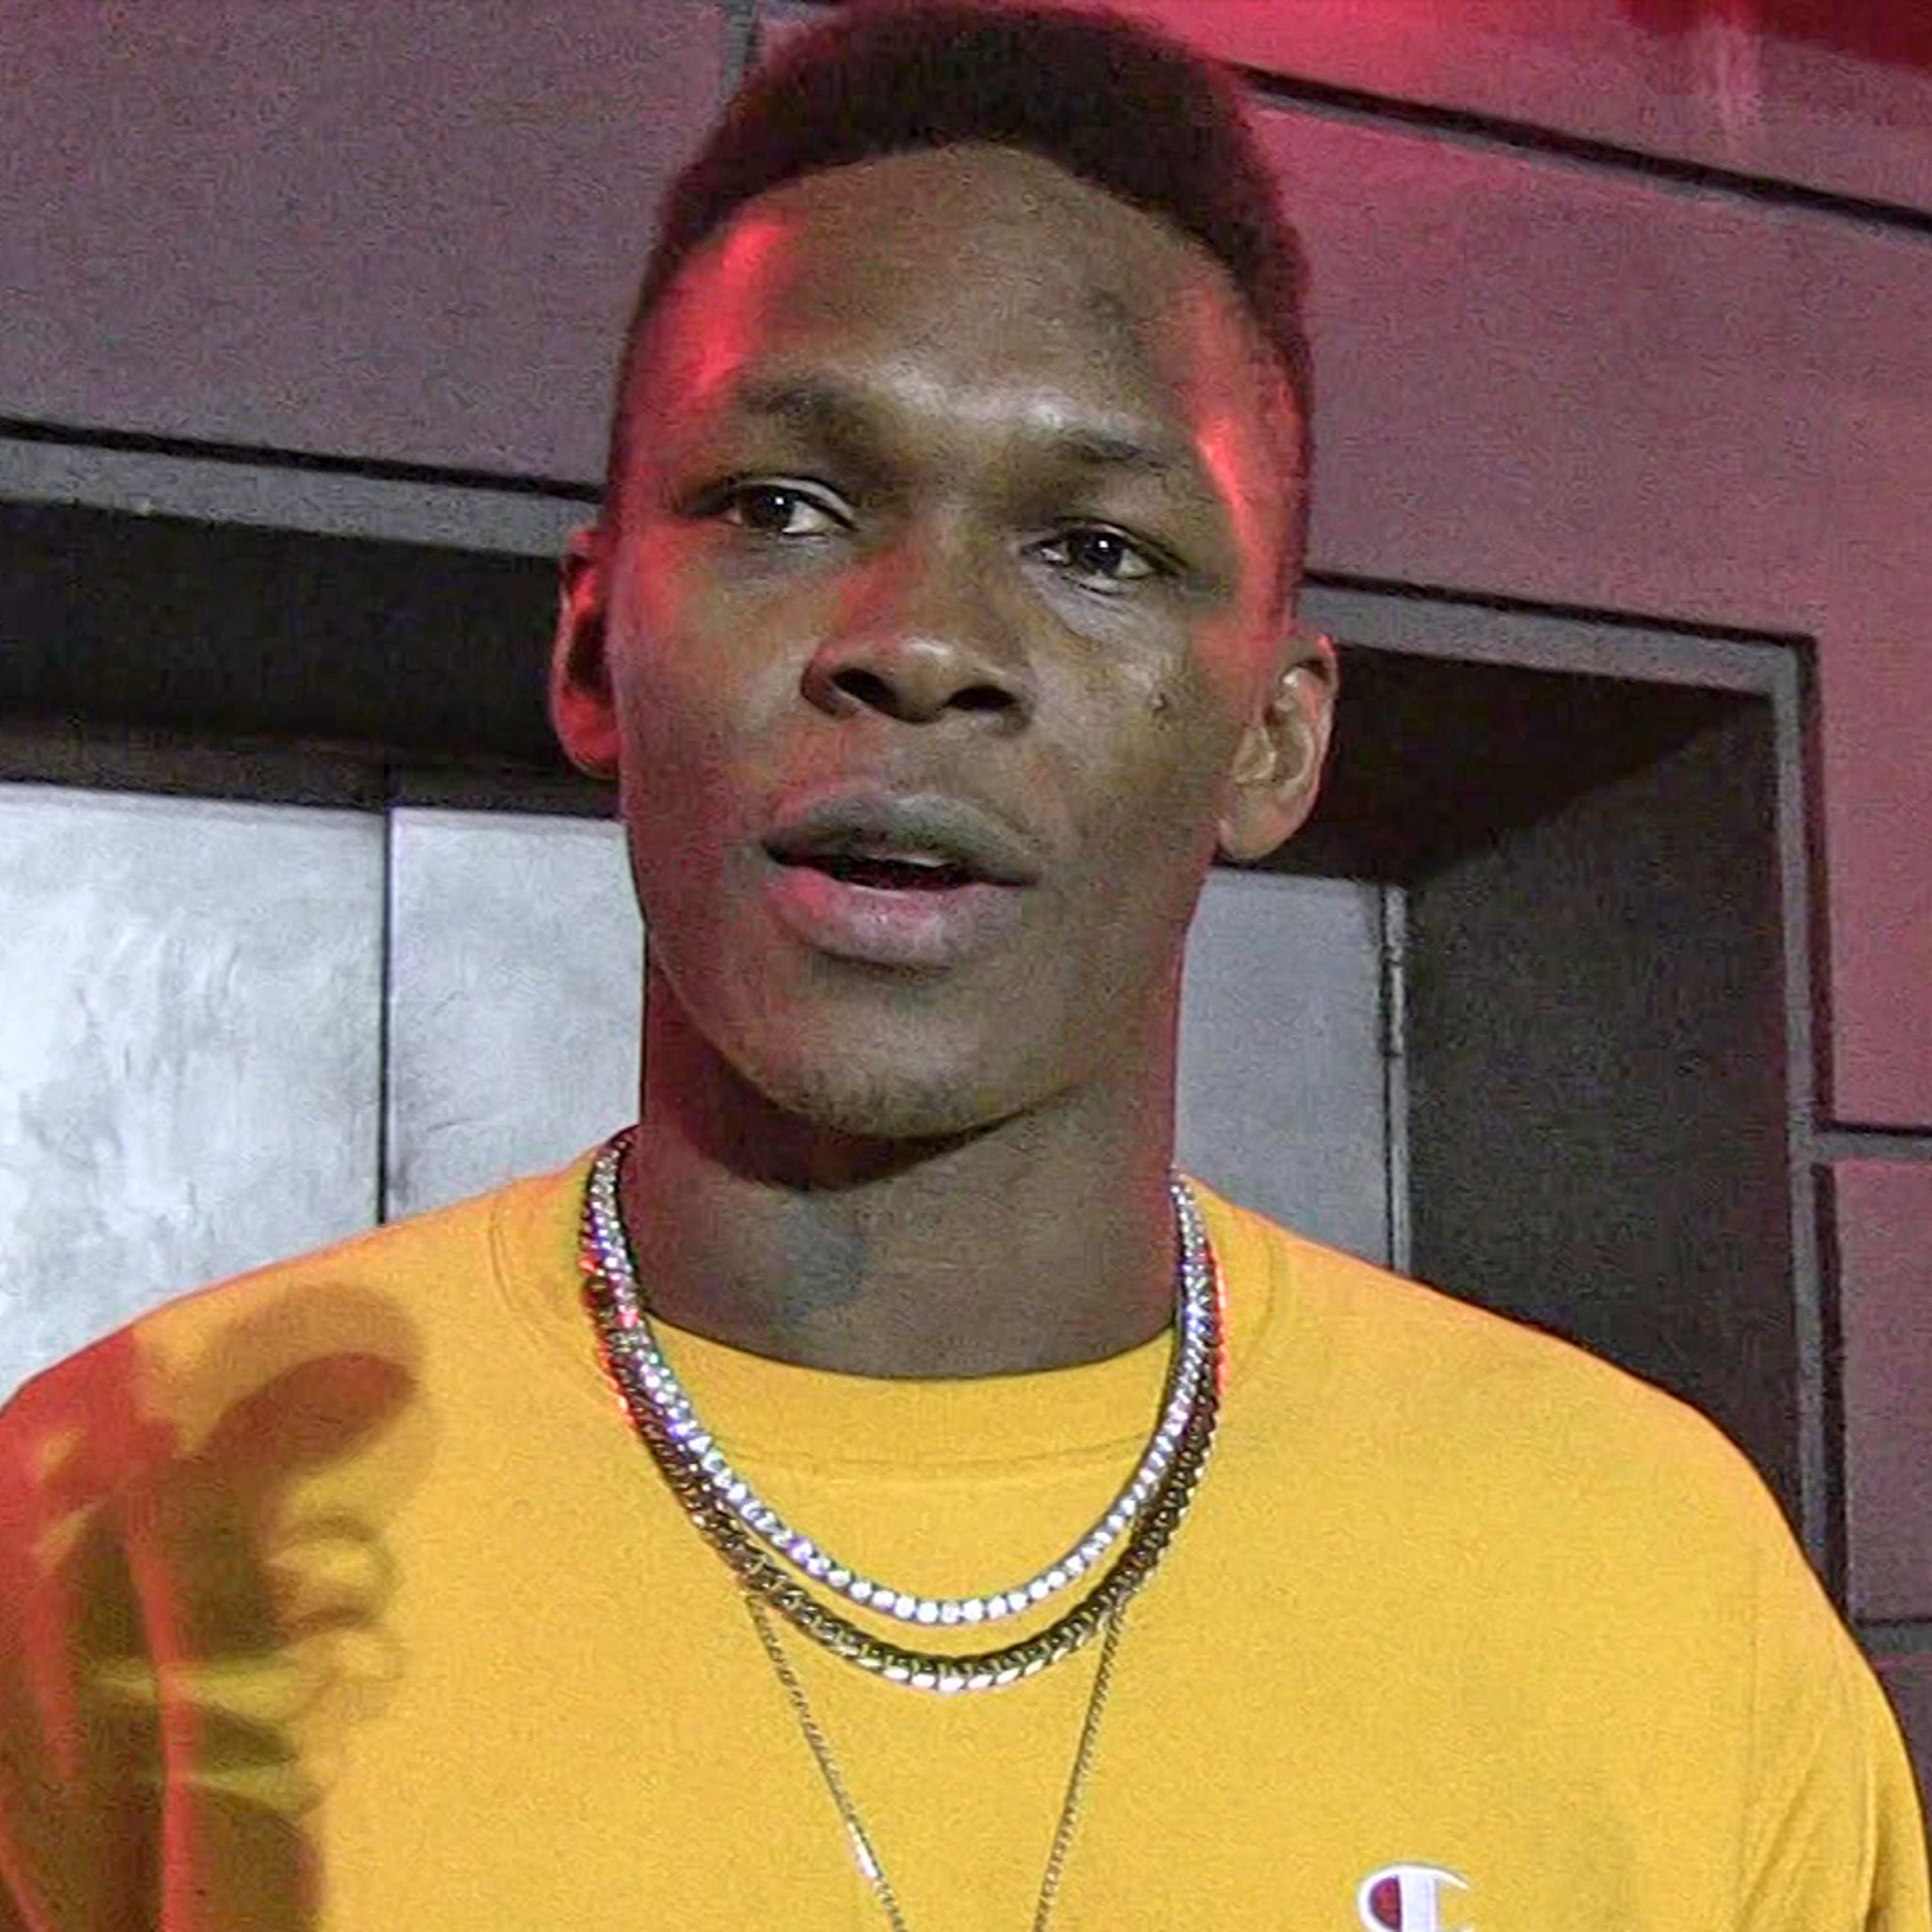 Israel Adesanya Brass Knuckles Case To Be Dismissed If UFC Star